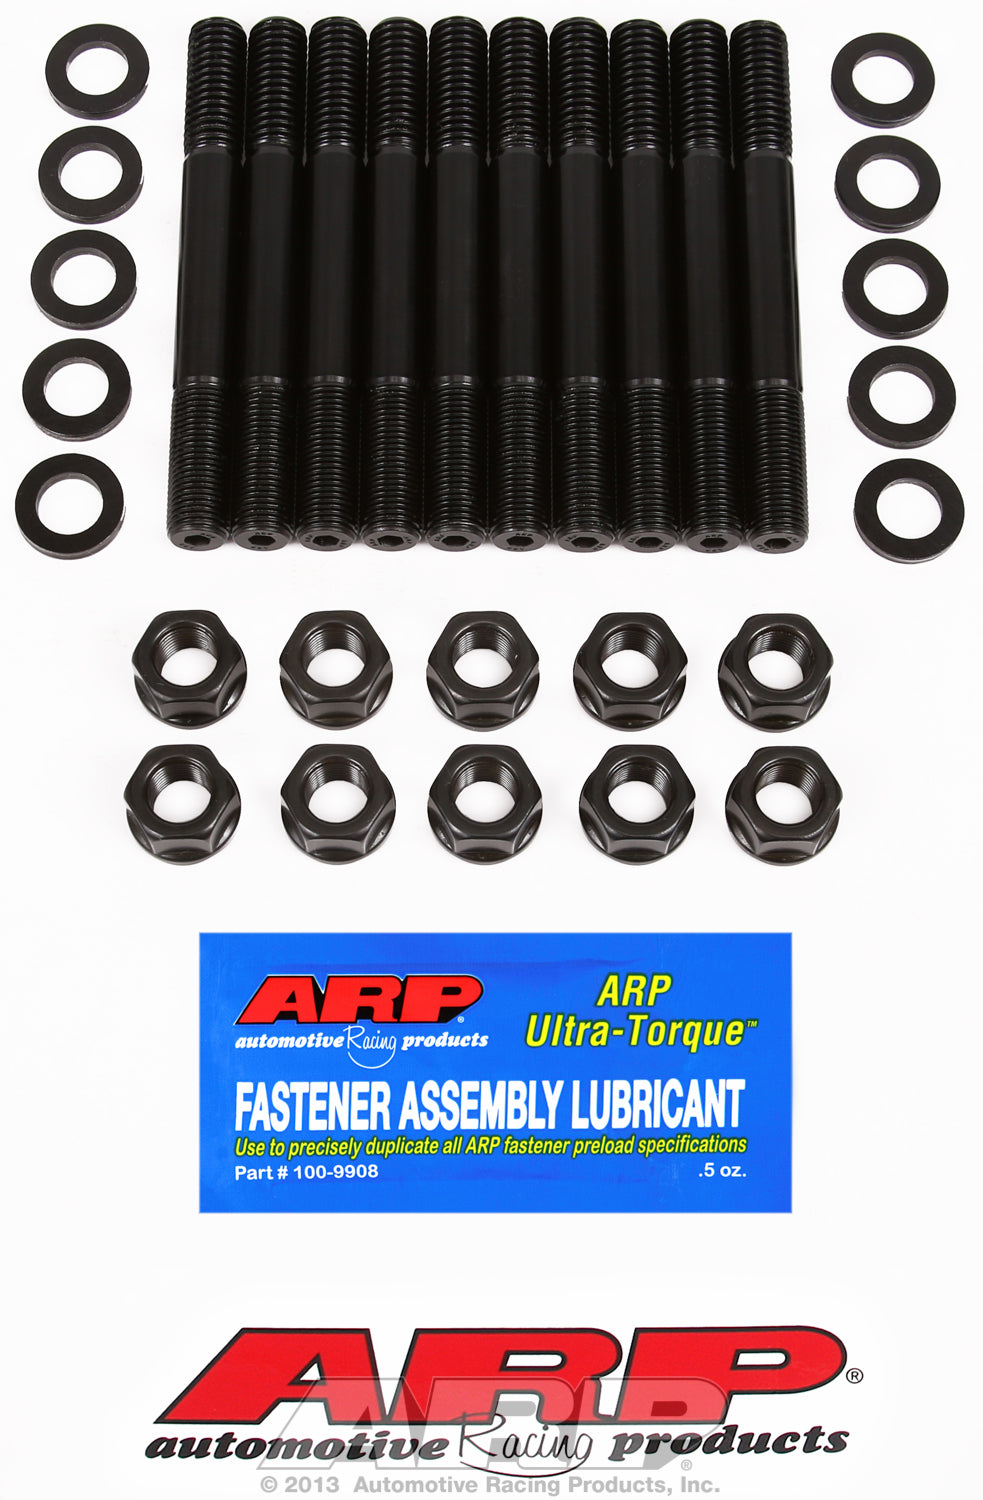 Main Stud Kit for Ford 390-428 cid FE series (hex nuts, 10 studs) modification to #5 cap required